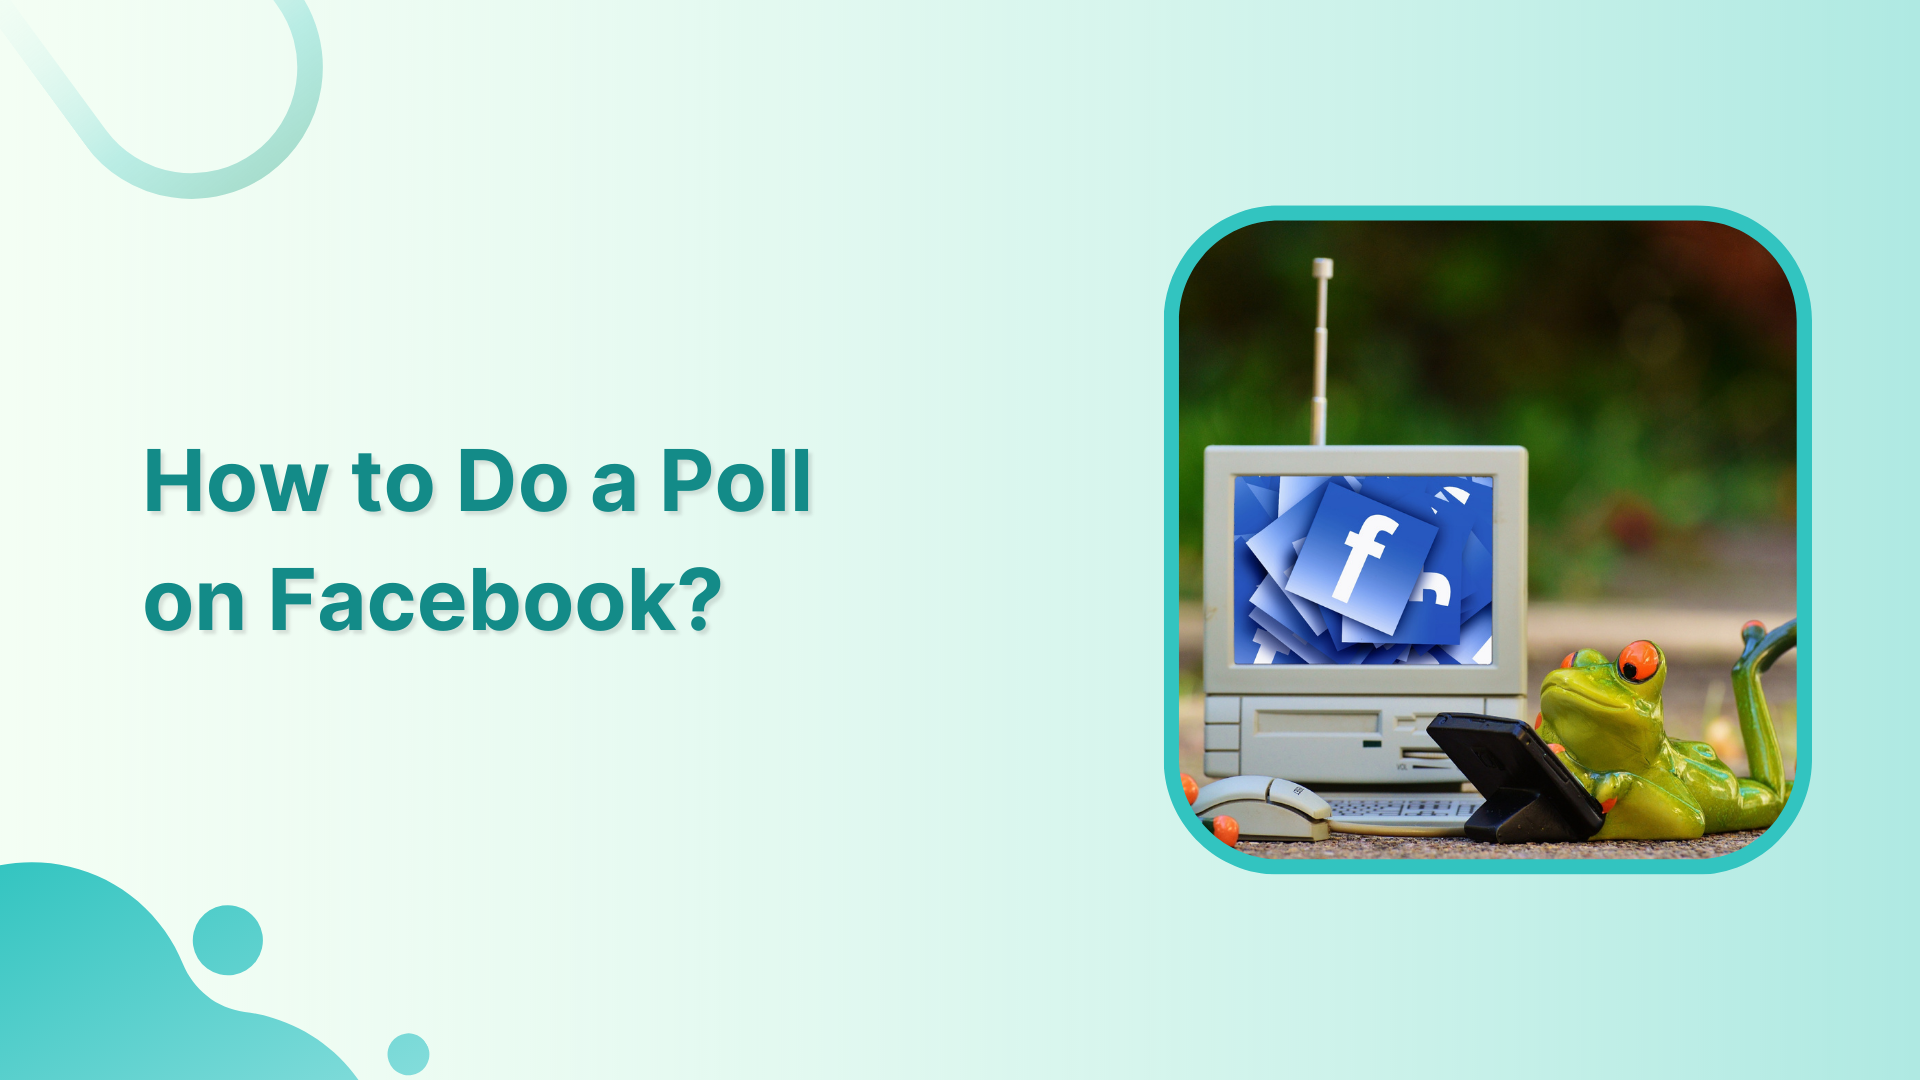 How to do poll on Facebook